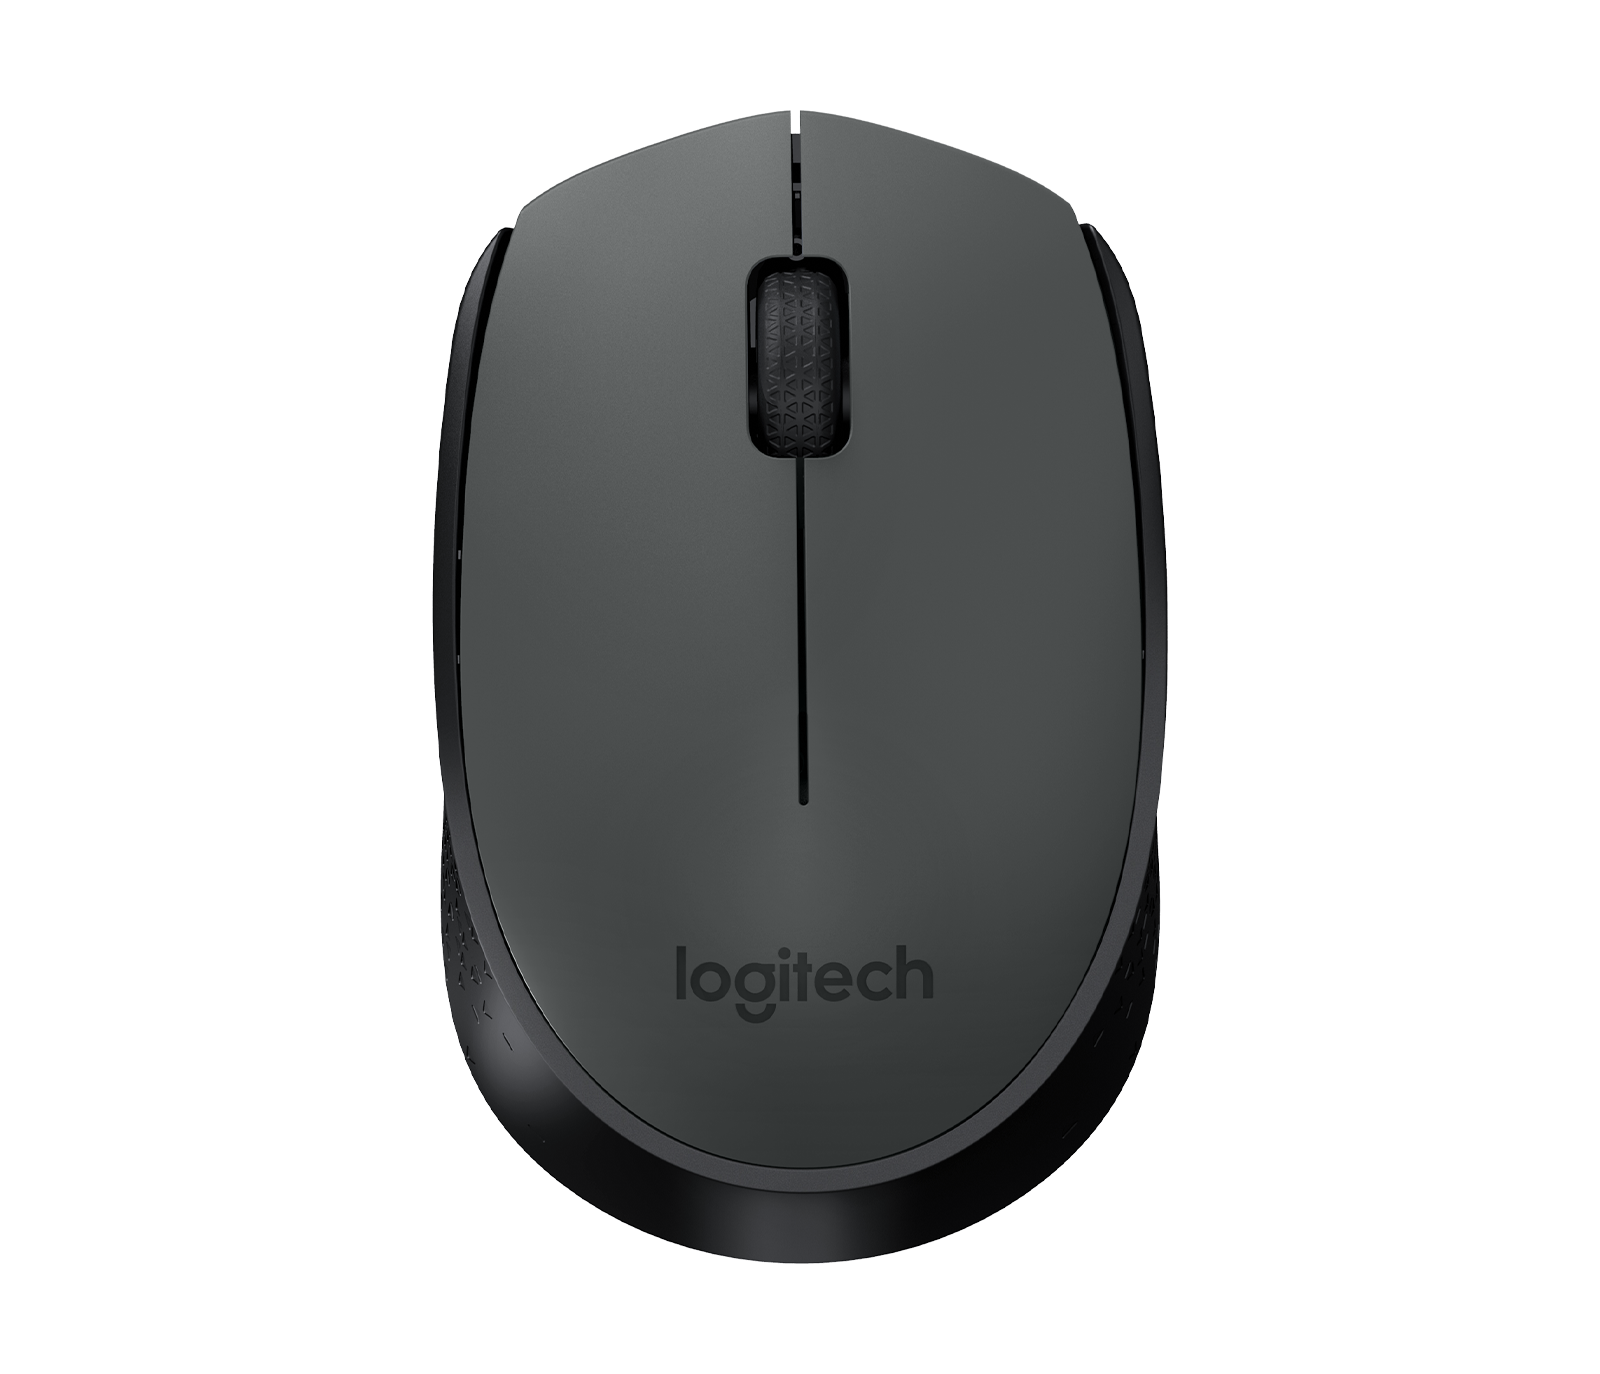 stille trug taxa Logitech M171 Wireless Mouse - Comfort and Mobility